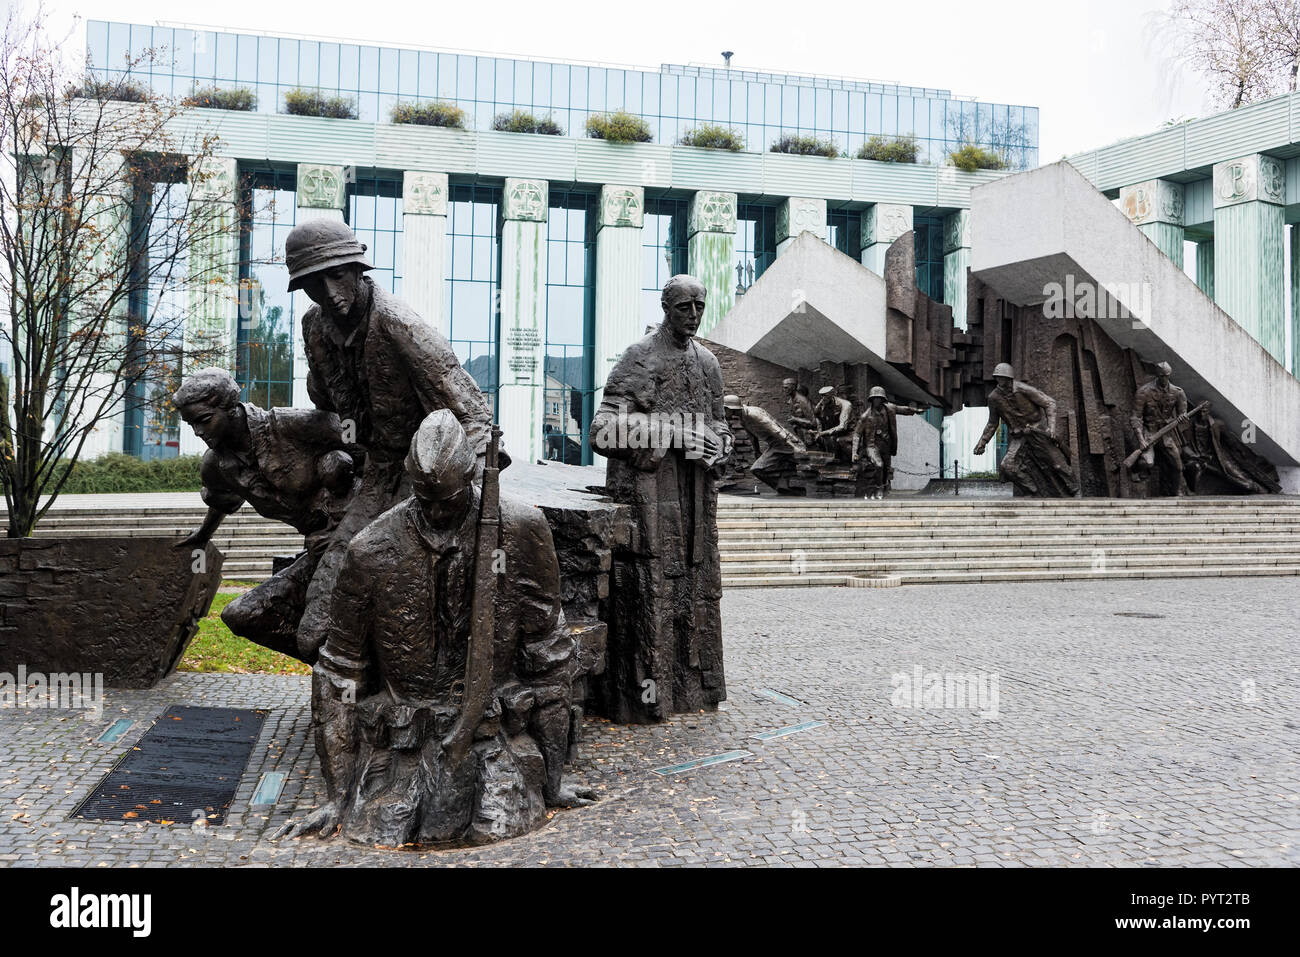 View of the Warsaw Uprising Monument, a memorial dedicated to the Warsaw Uprising of 1944, on October 22, 2017 in Warsaw, Poland Stock Photo